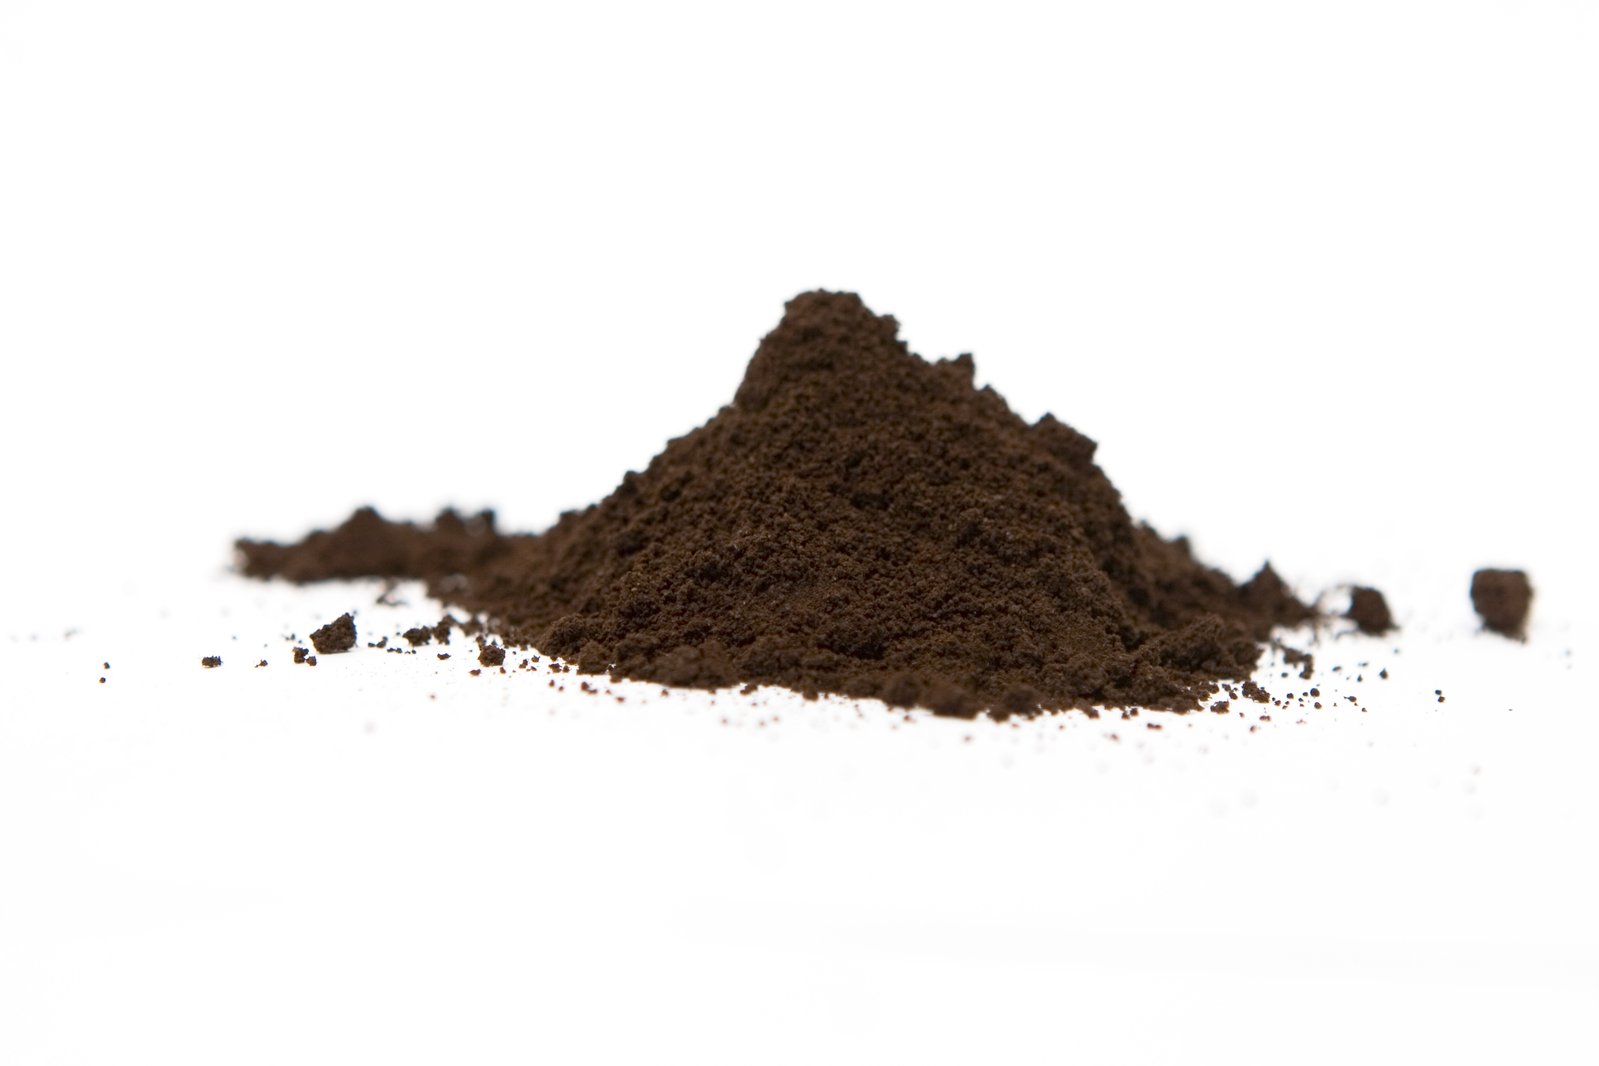 a pile of dirt sitting on top of a white ground